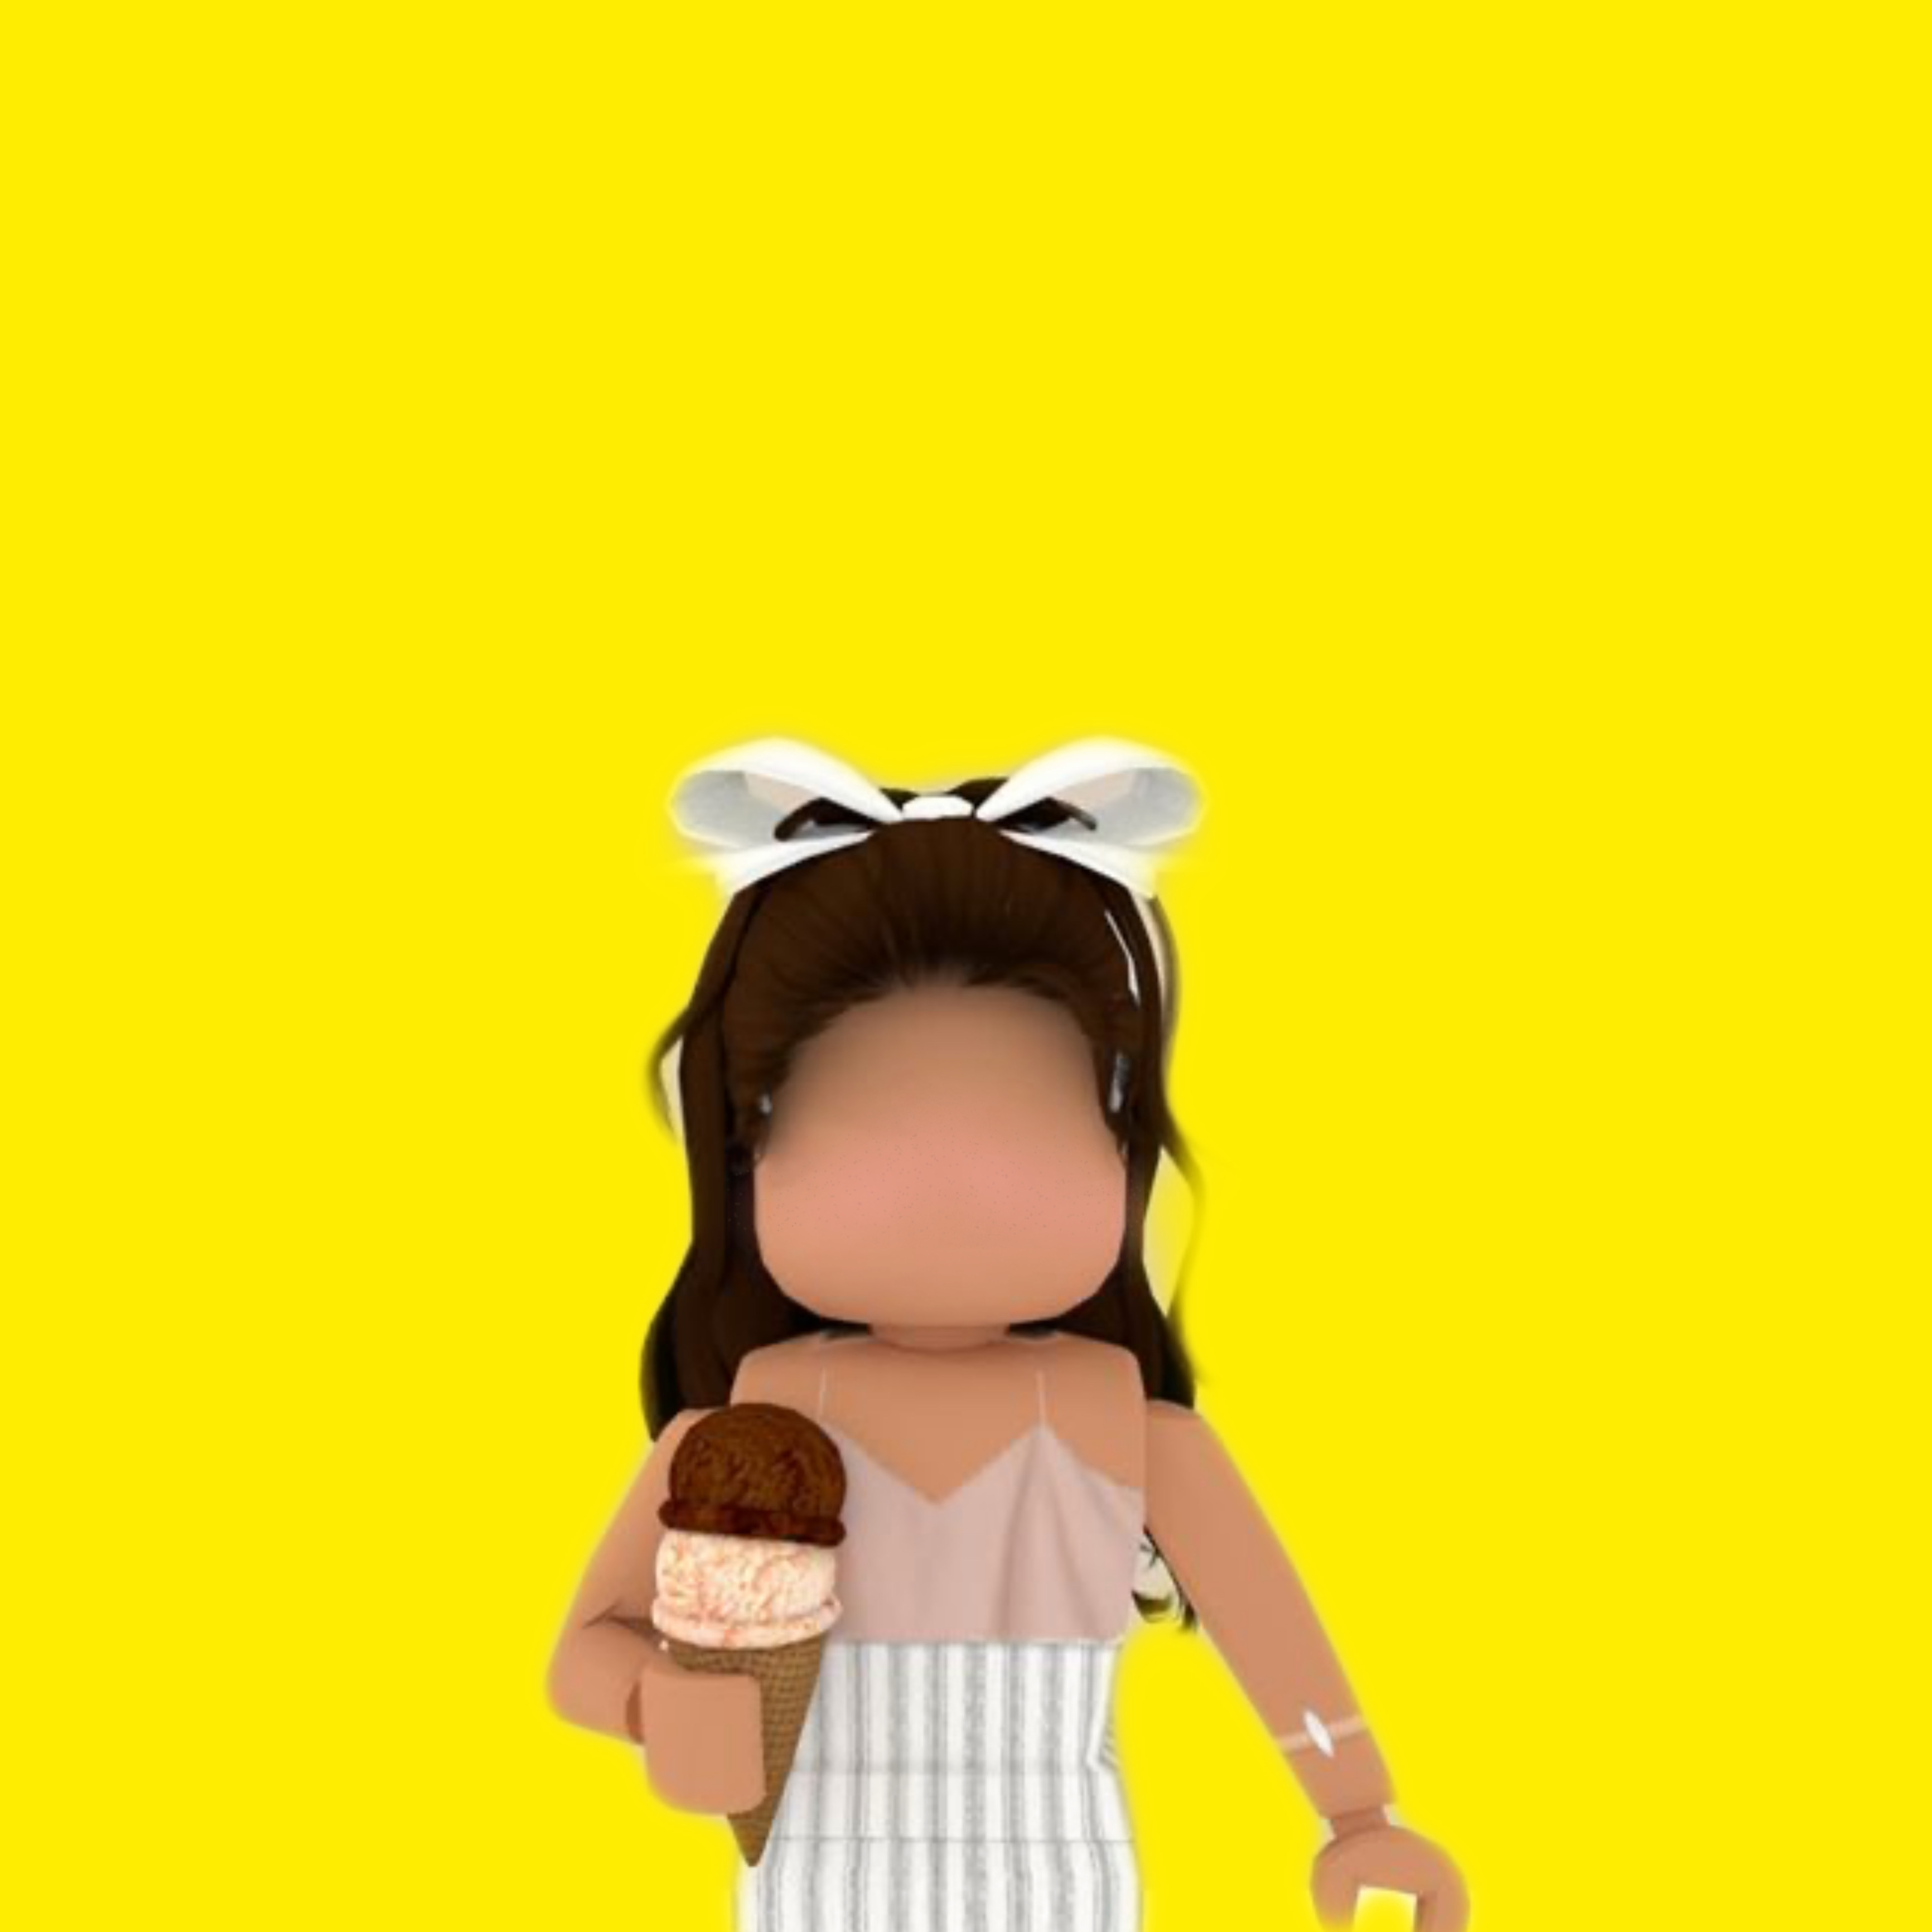 Roblox Profilepicture Girl Image By Stormyxroblox - roblox profile picture leslygril09